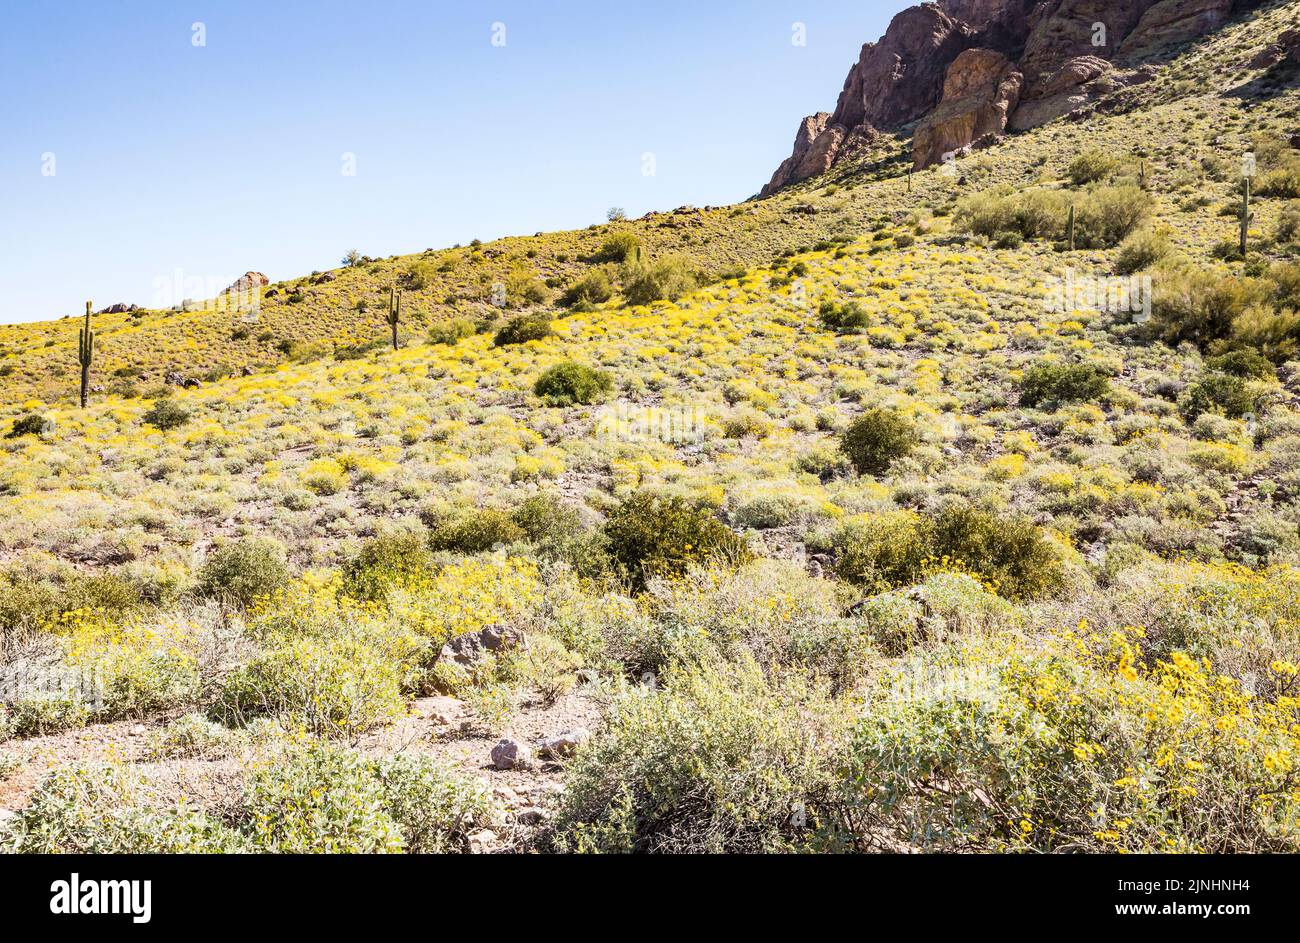 Steep rock formations and yellow Spring flowers below in Lost Dutchman State Park, Arizona, USA. Stock Photo